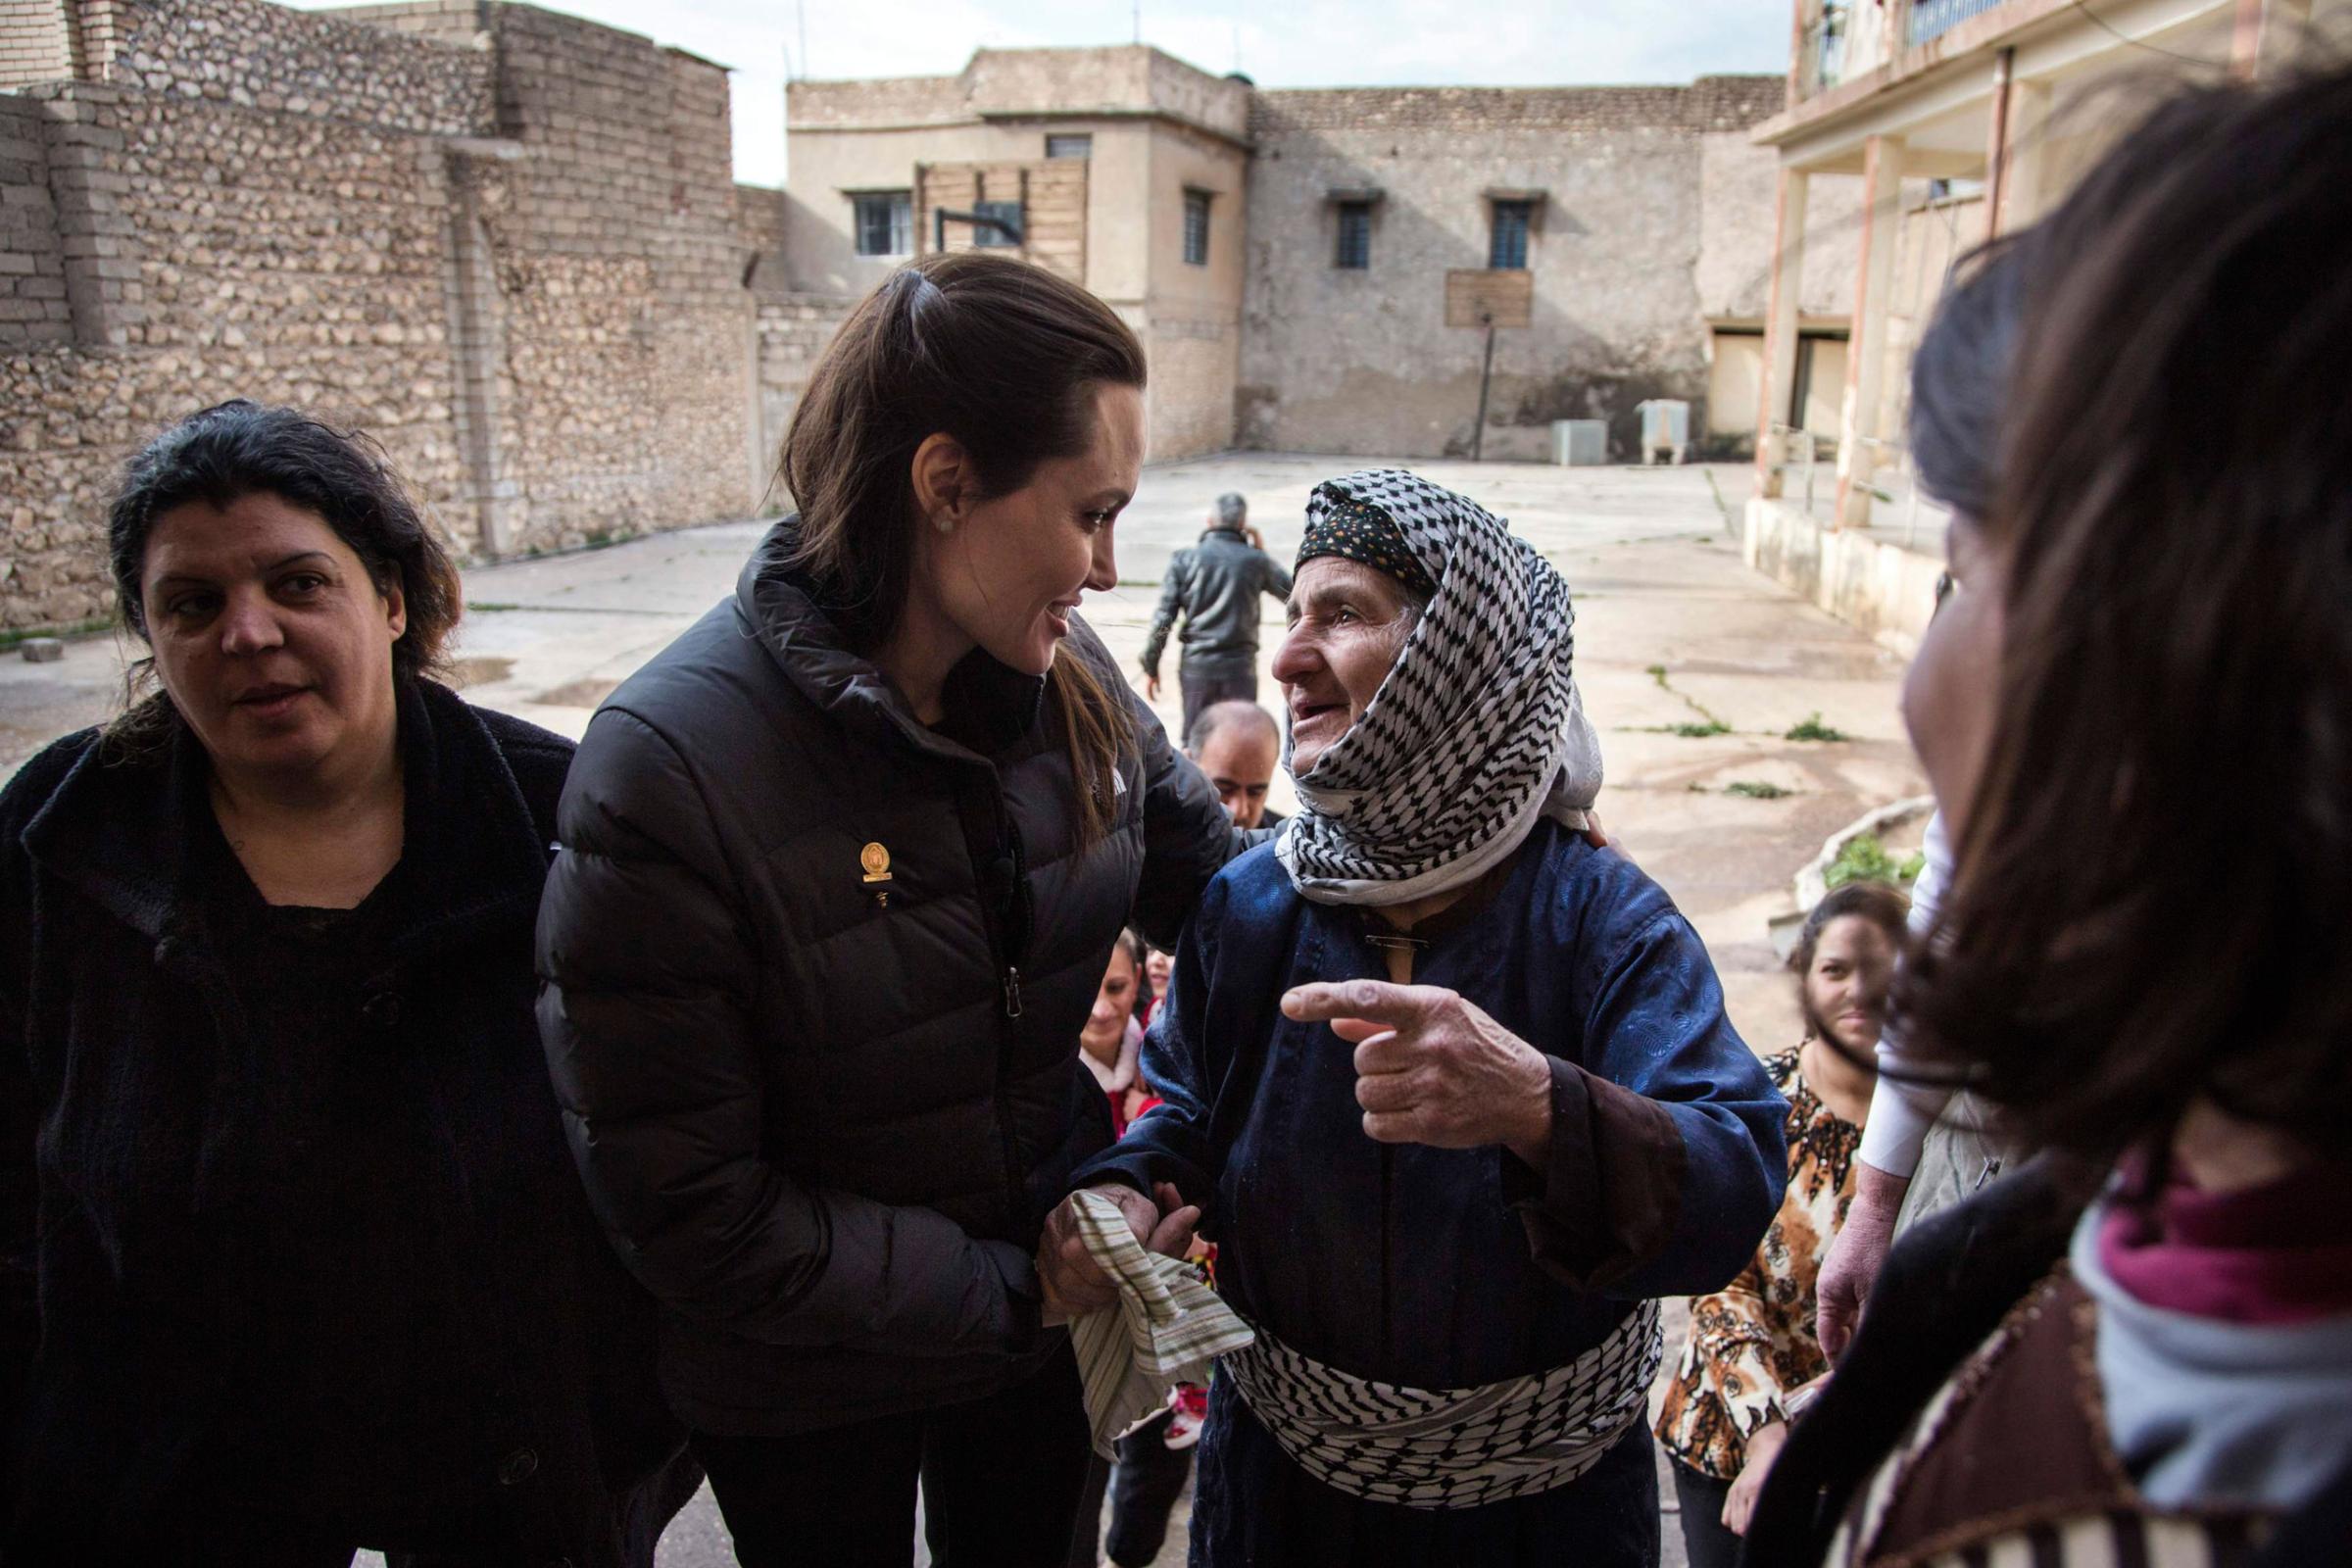 United Nations High Commissioner for Refugees (UNHCR) Special Envoy Angelina Jolie meets displaced Iraqis who are members of the minority Christian community, living in an abandoned school in Al Qosh, northern Iraq on Jan. 26, 2015.